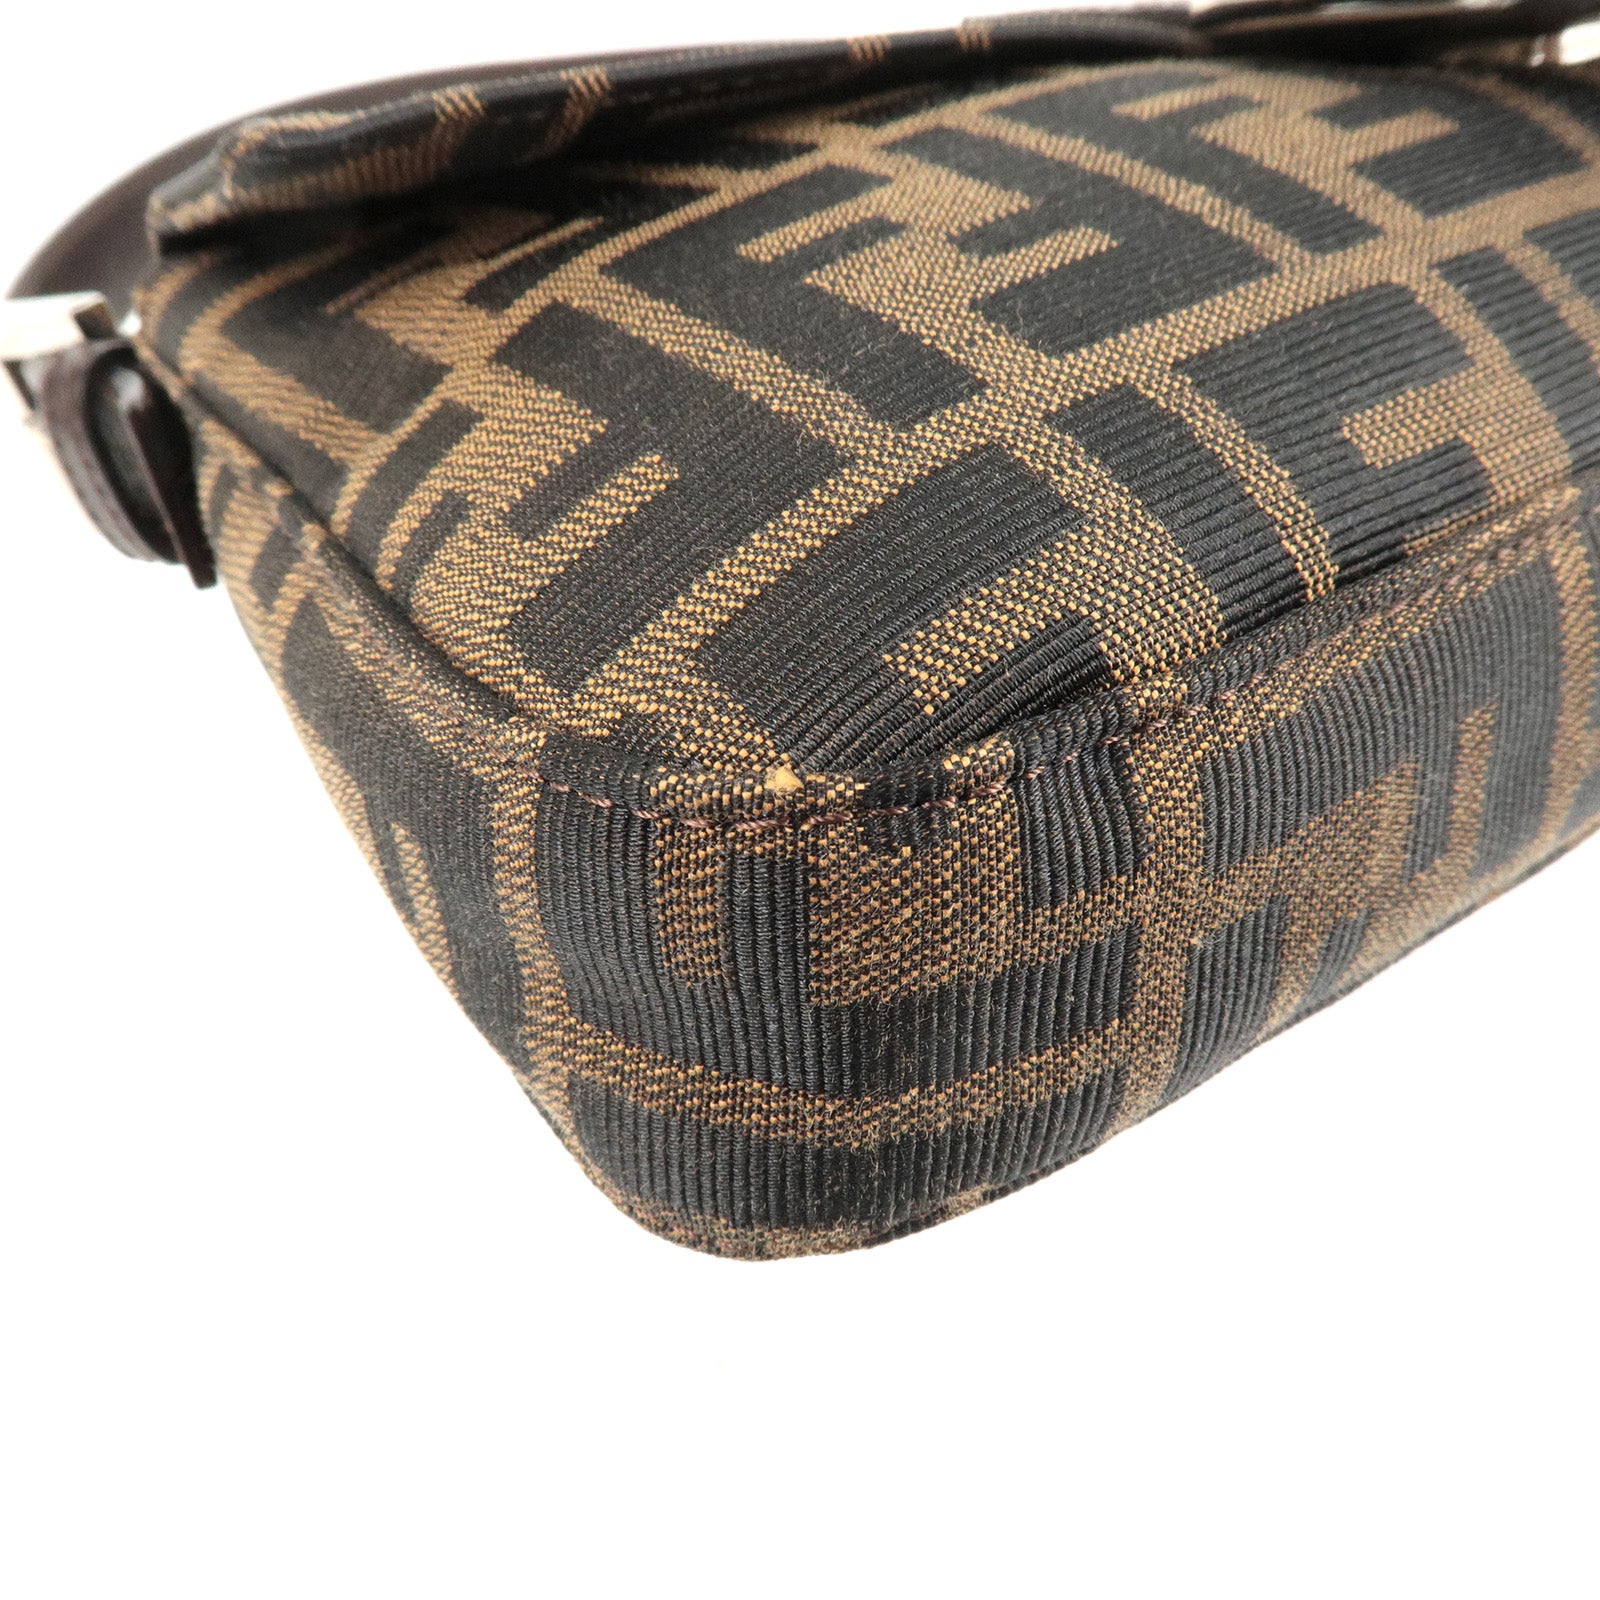 Fendi Authenticated Leather Clutch Bag